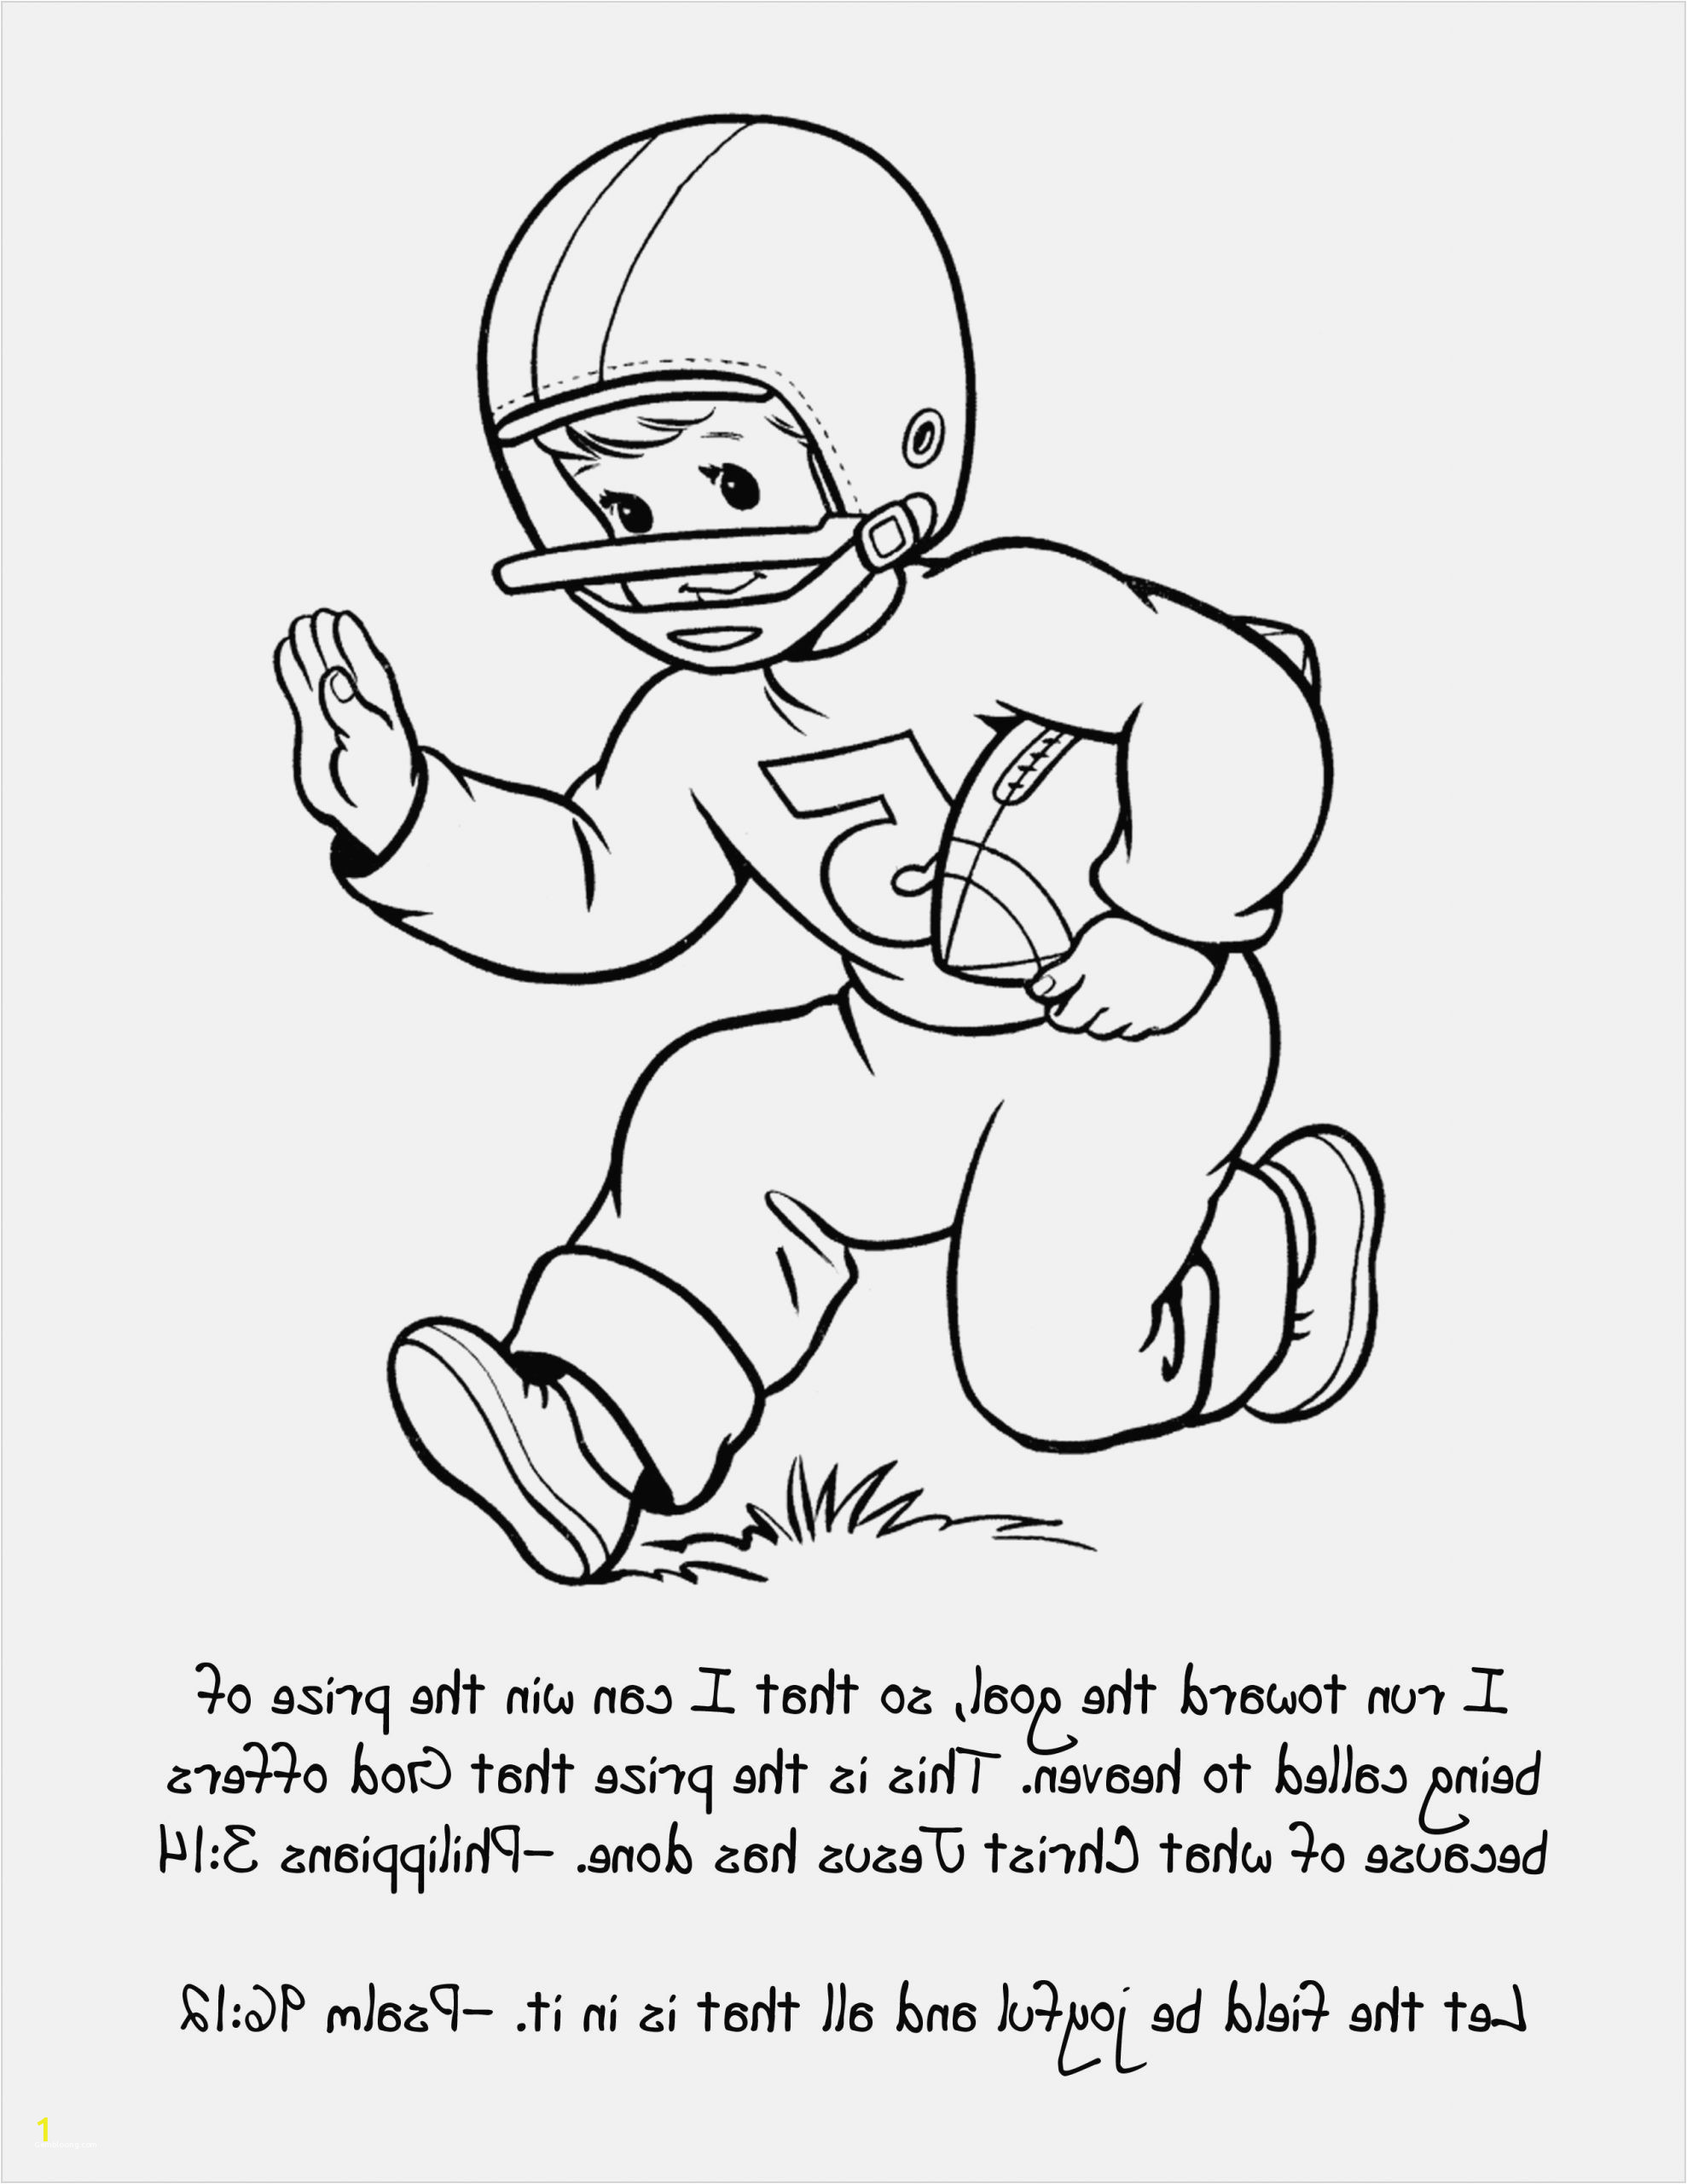 Coloring Pages for Young toddlers Coloring Pages Free Coloring Pages to Print for Adults